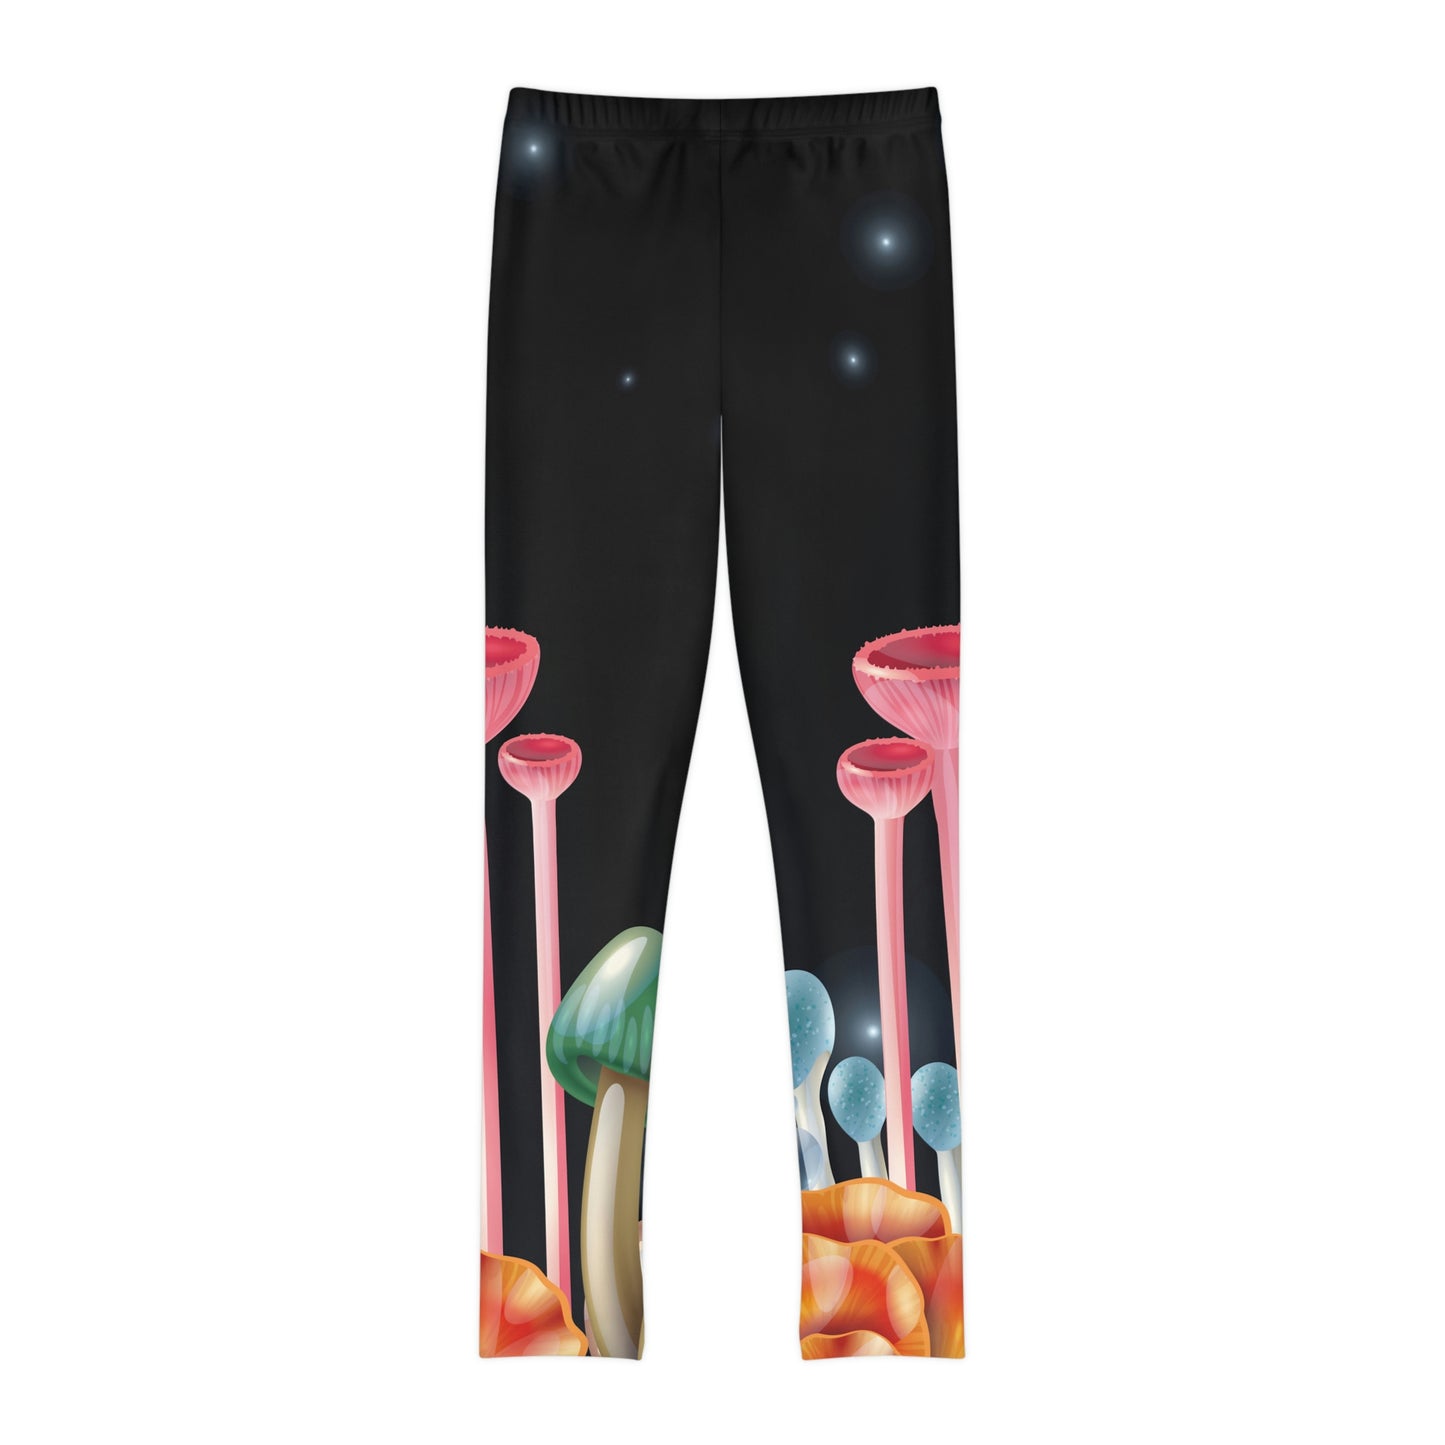 Magic Mushrooms cottagecore, Psychedelic Youth Leggings, One of a Kind - Kids Unique Workout Activewear tights, Daughter, Niece Christmas Gift